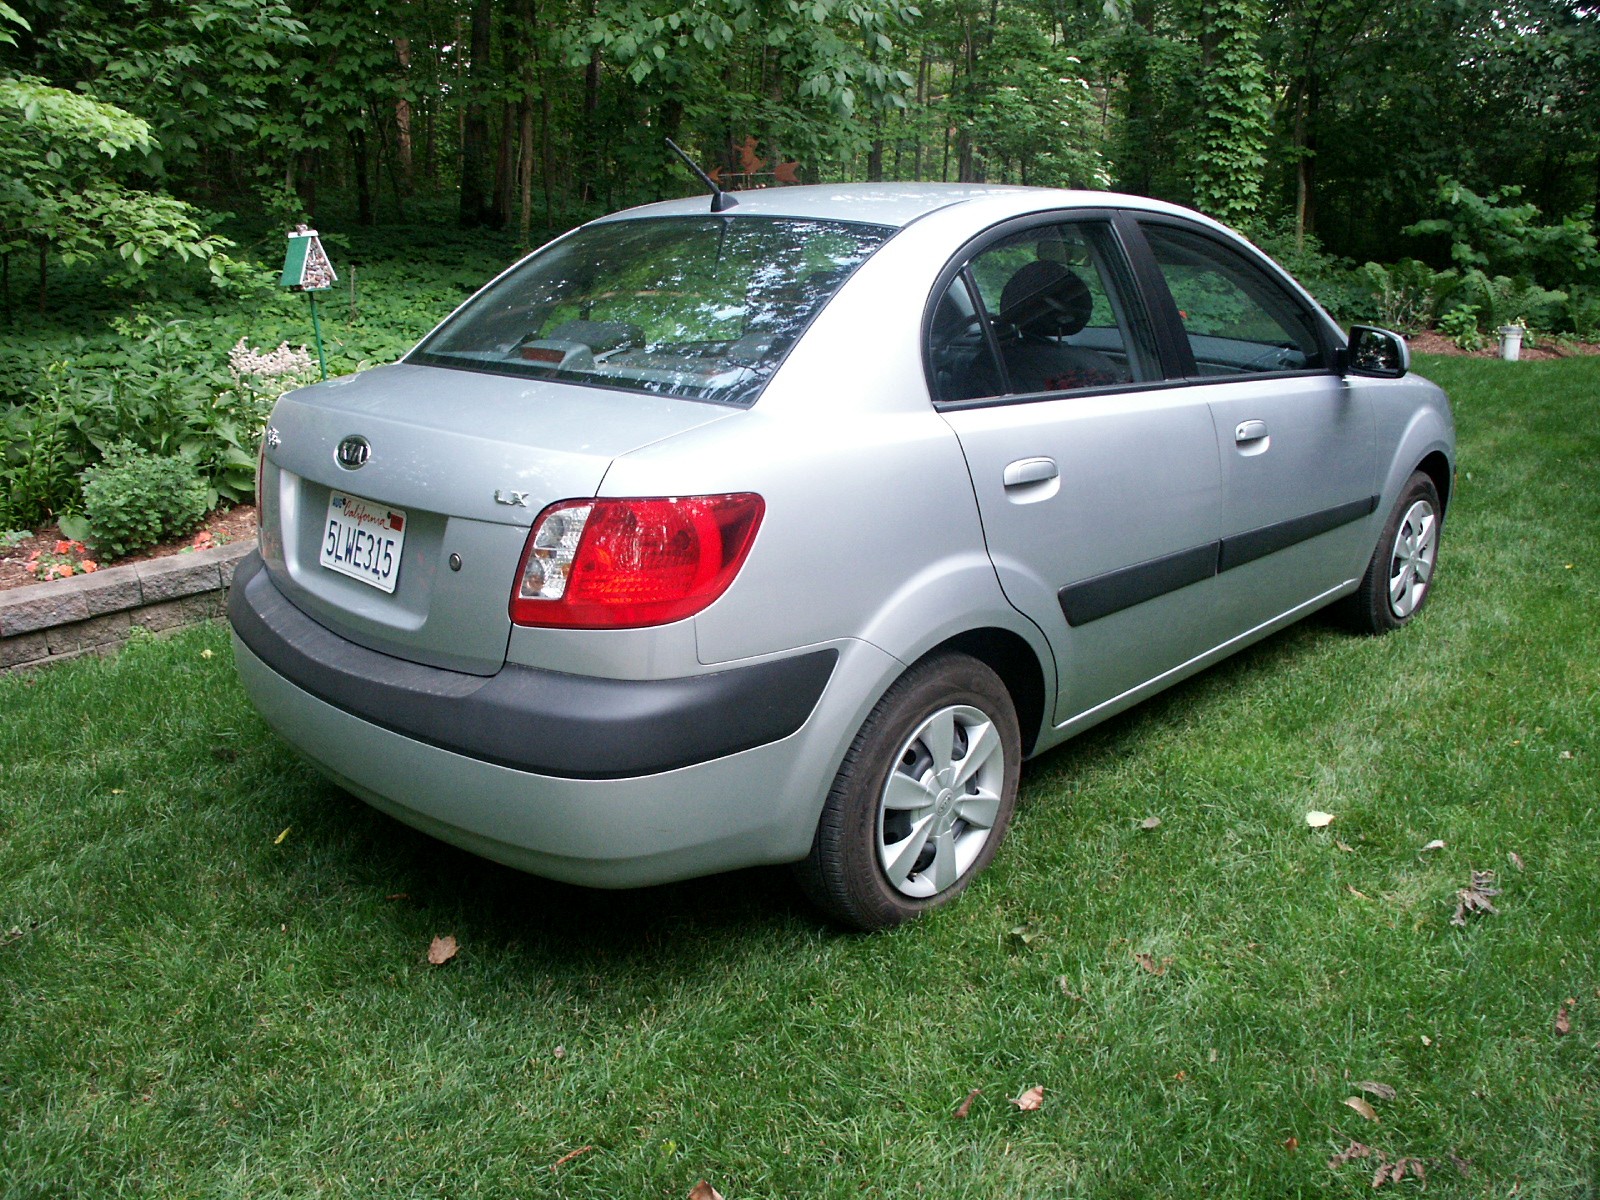 Kia Rio 2006 Review, Amazing Pictures and Images Look